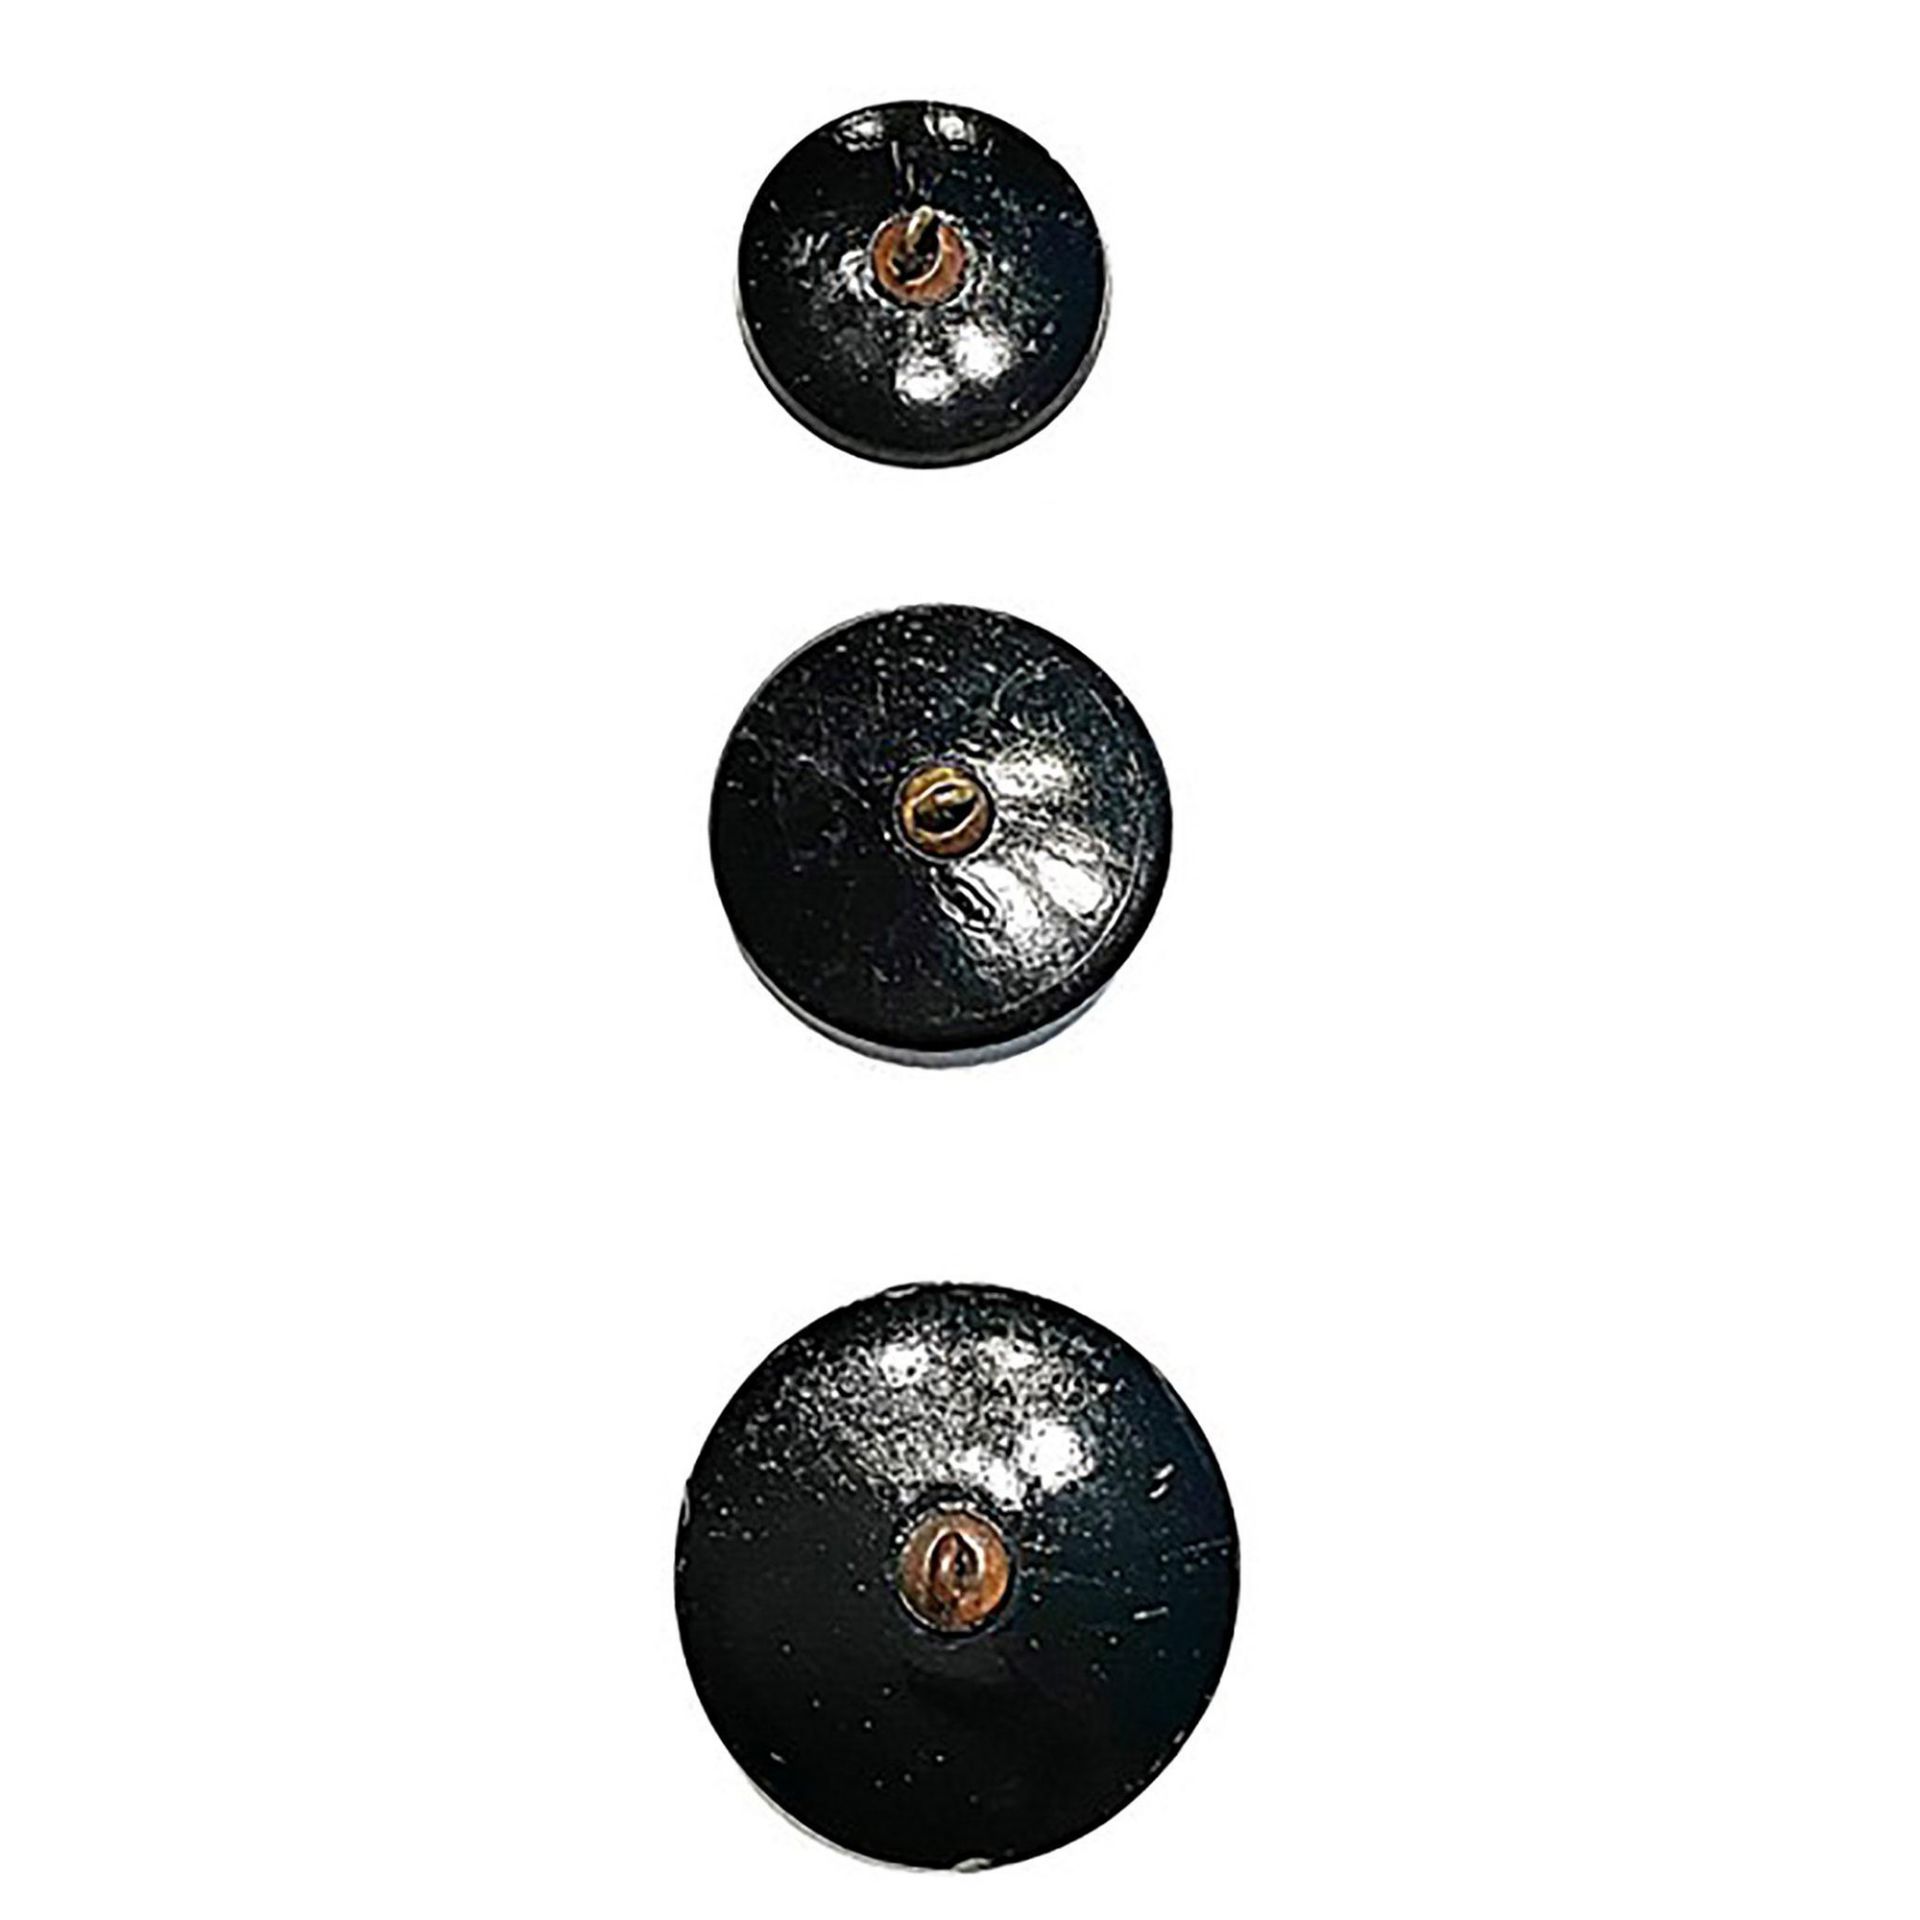 Small card of division 1 pictorial black glass buttons - Bild 5 aus 5